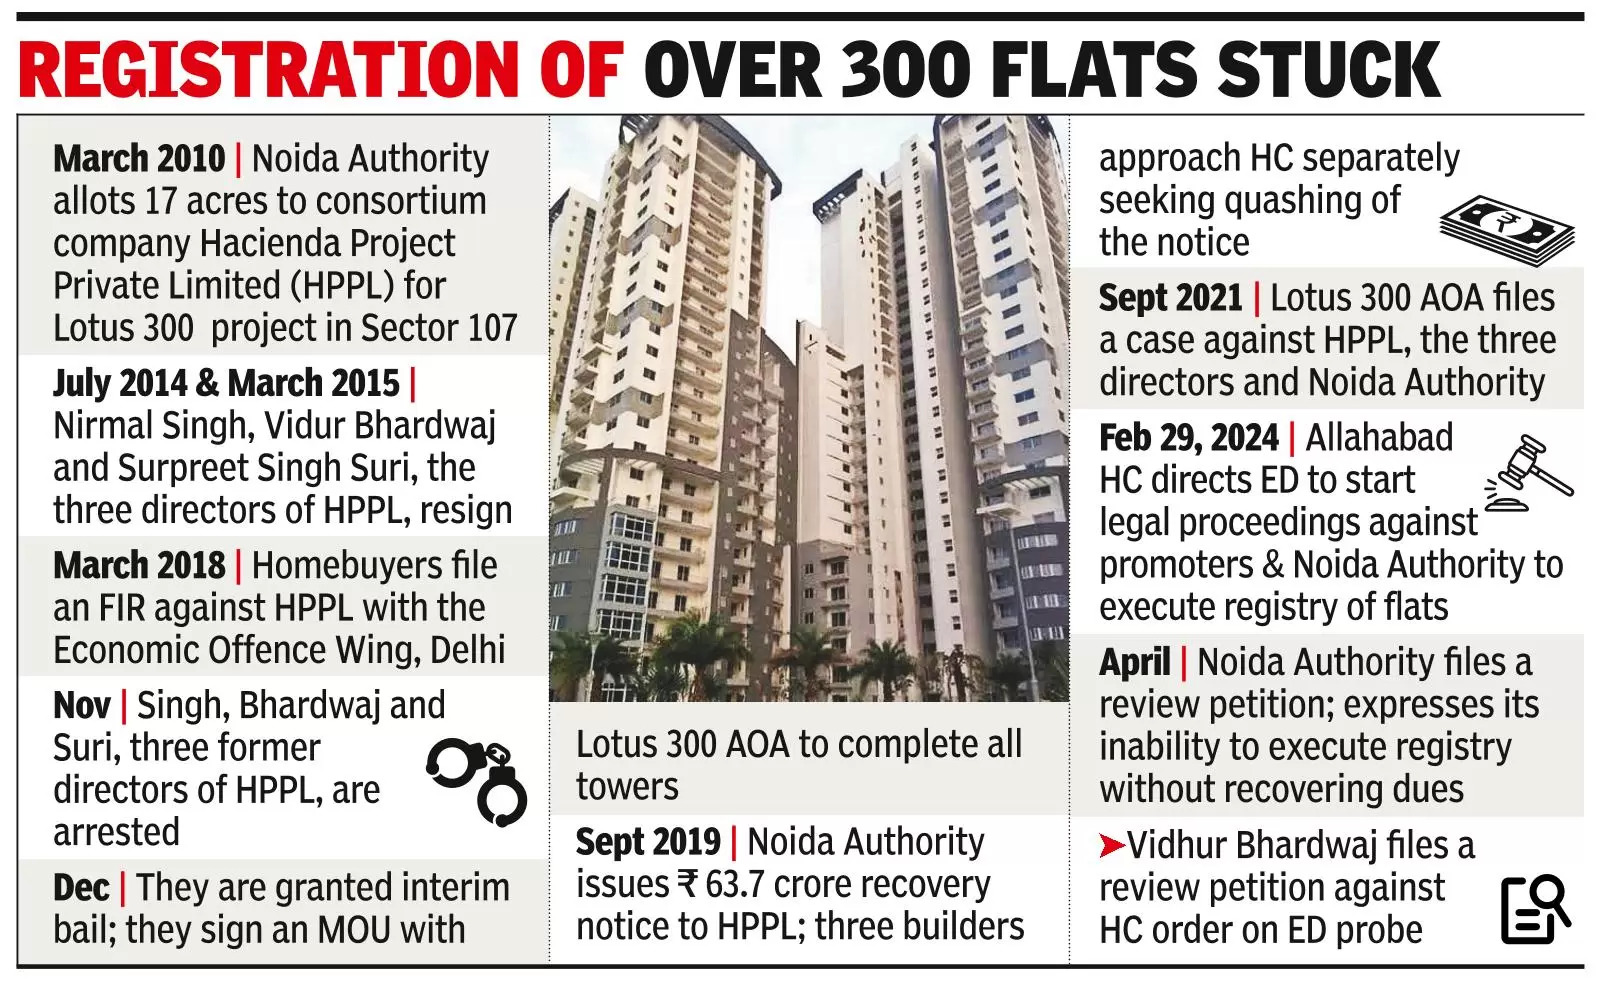 Noida files review plea in HC, says can’t execute registry for Lotus flats